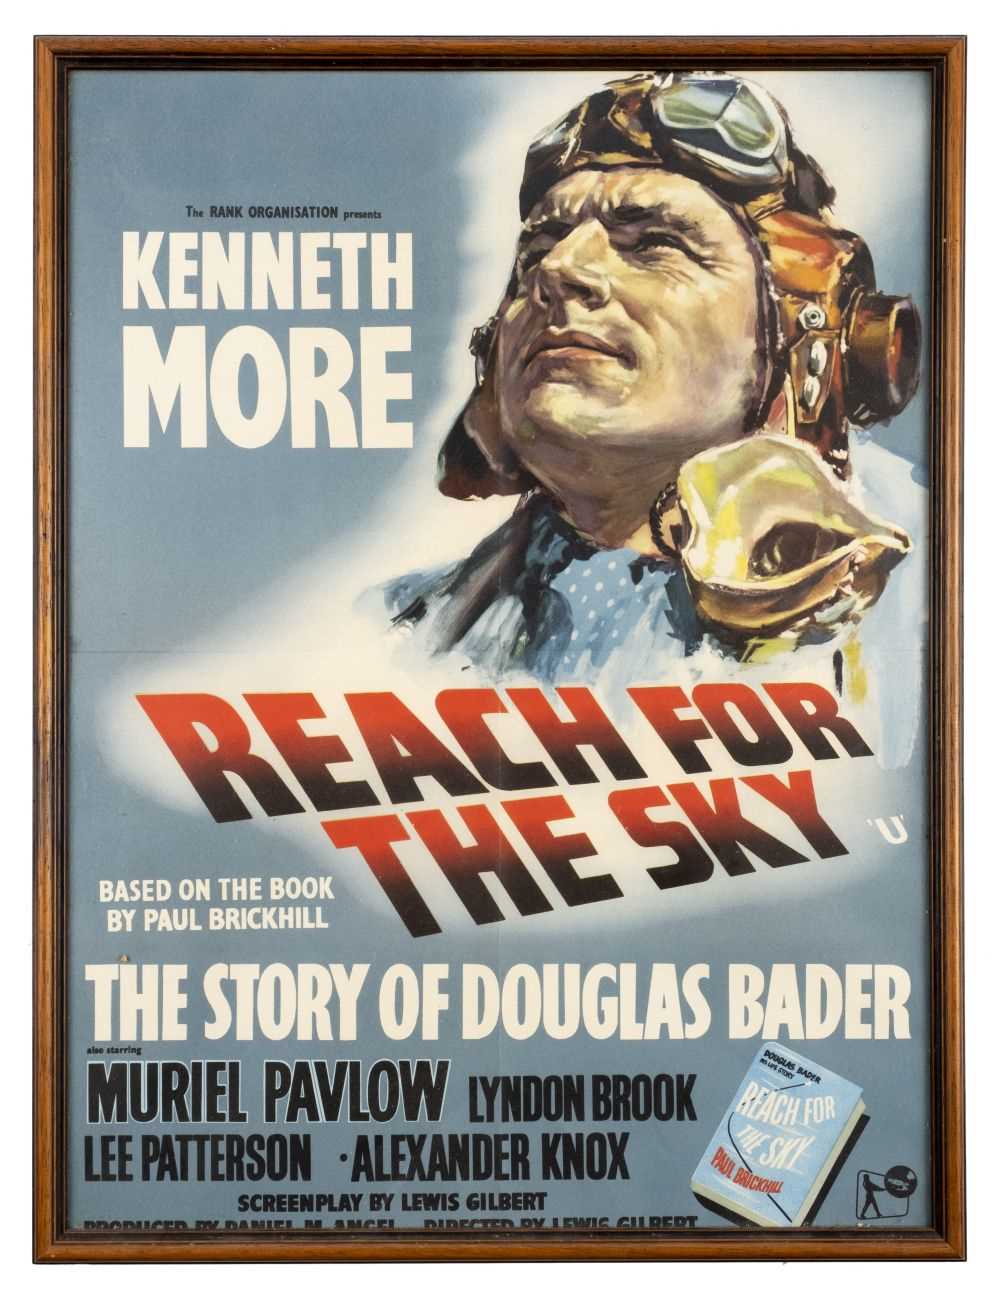 Lot 137 - 'Reach for the Sky', Vintage film poster